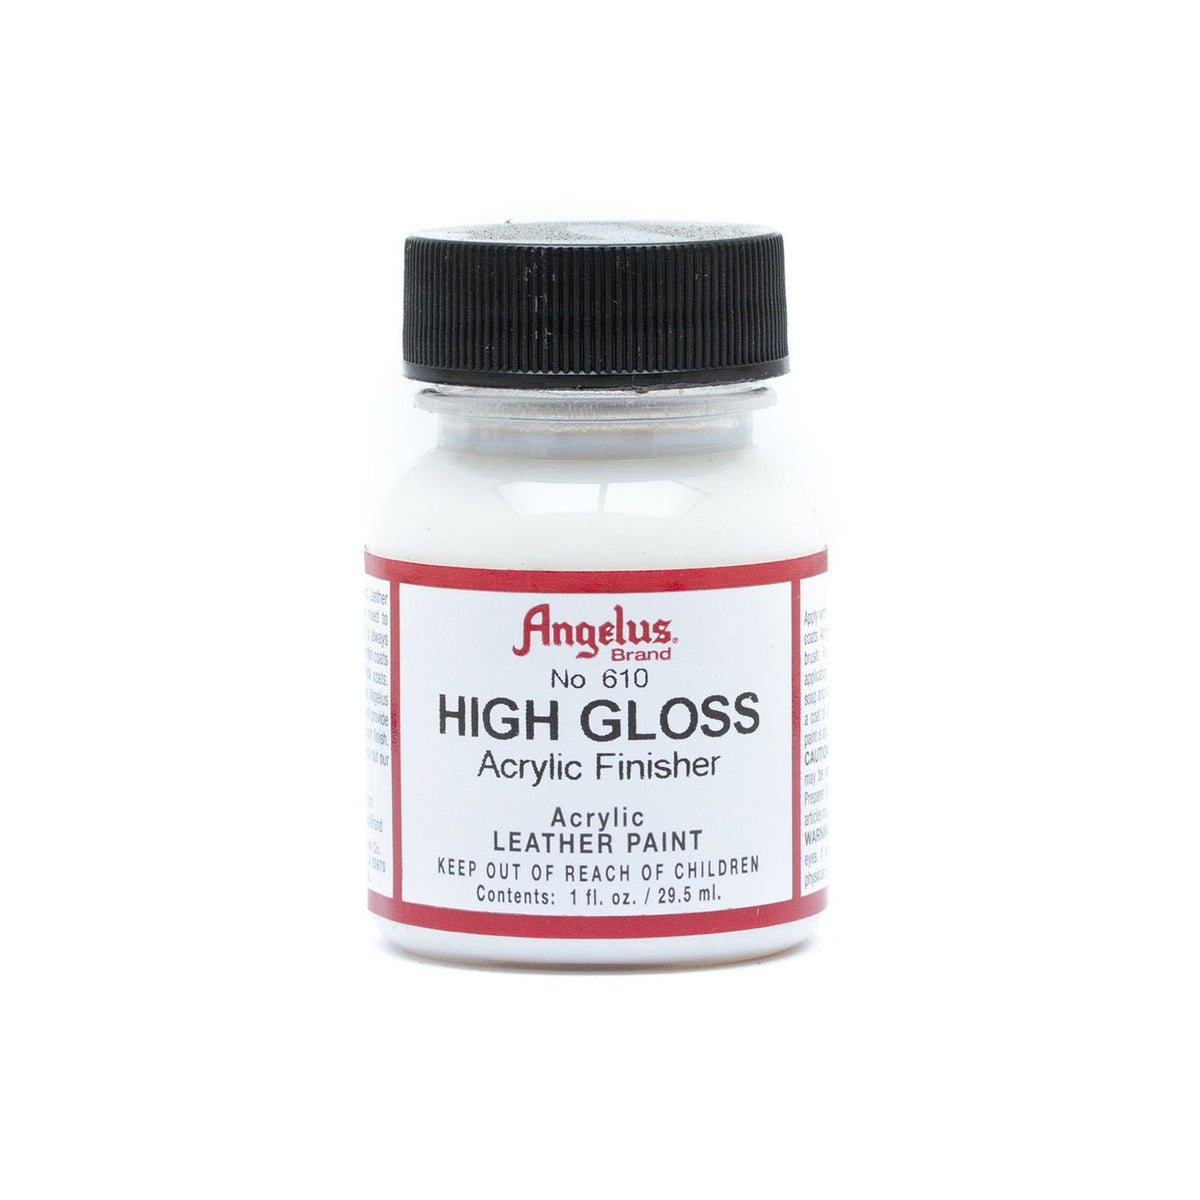 Angelus Acrylic Leather Finisher - 1 oz. Bottle - No. 610 High Gloss - merriartist.com